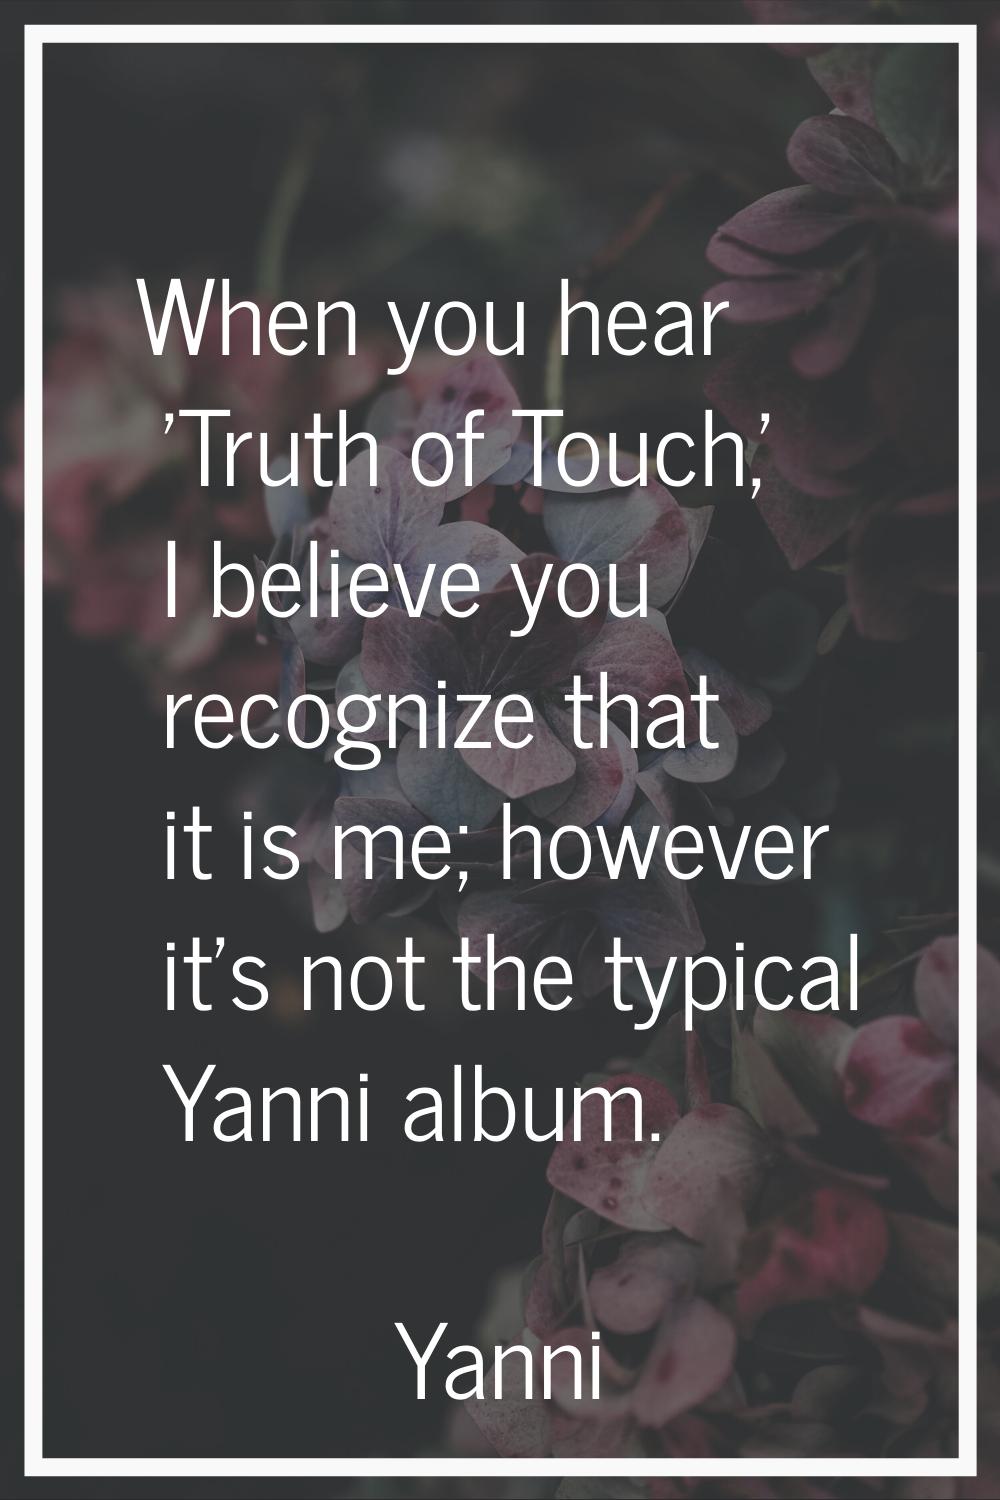 When you hear 'Truth of Touch,' I believe you recognize that it is me; however it's not the typical